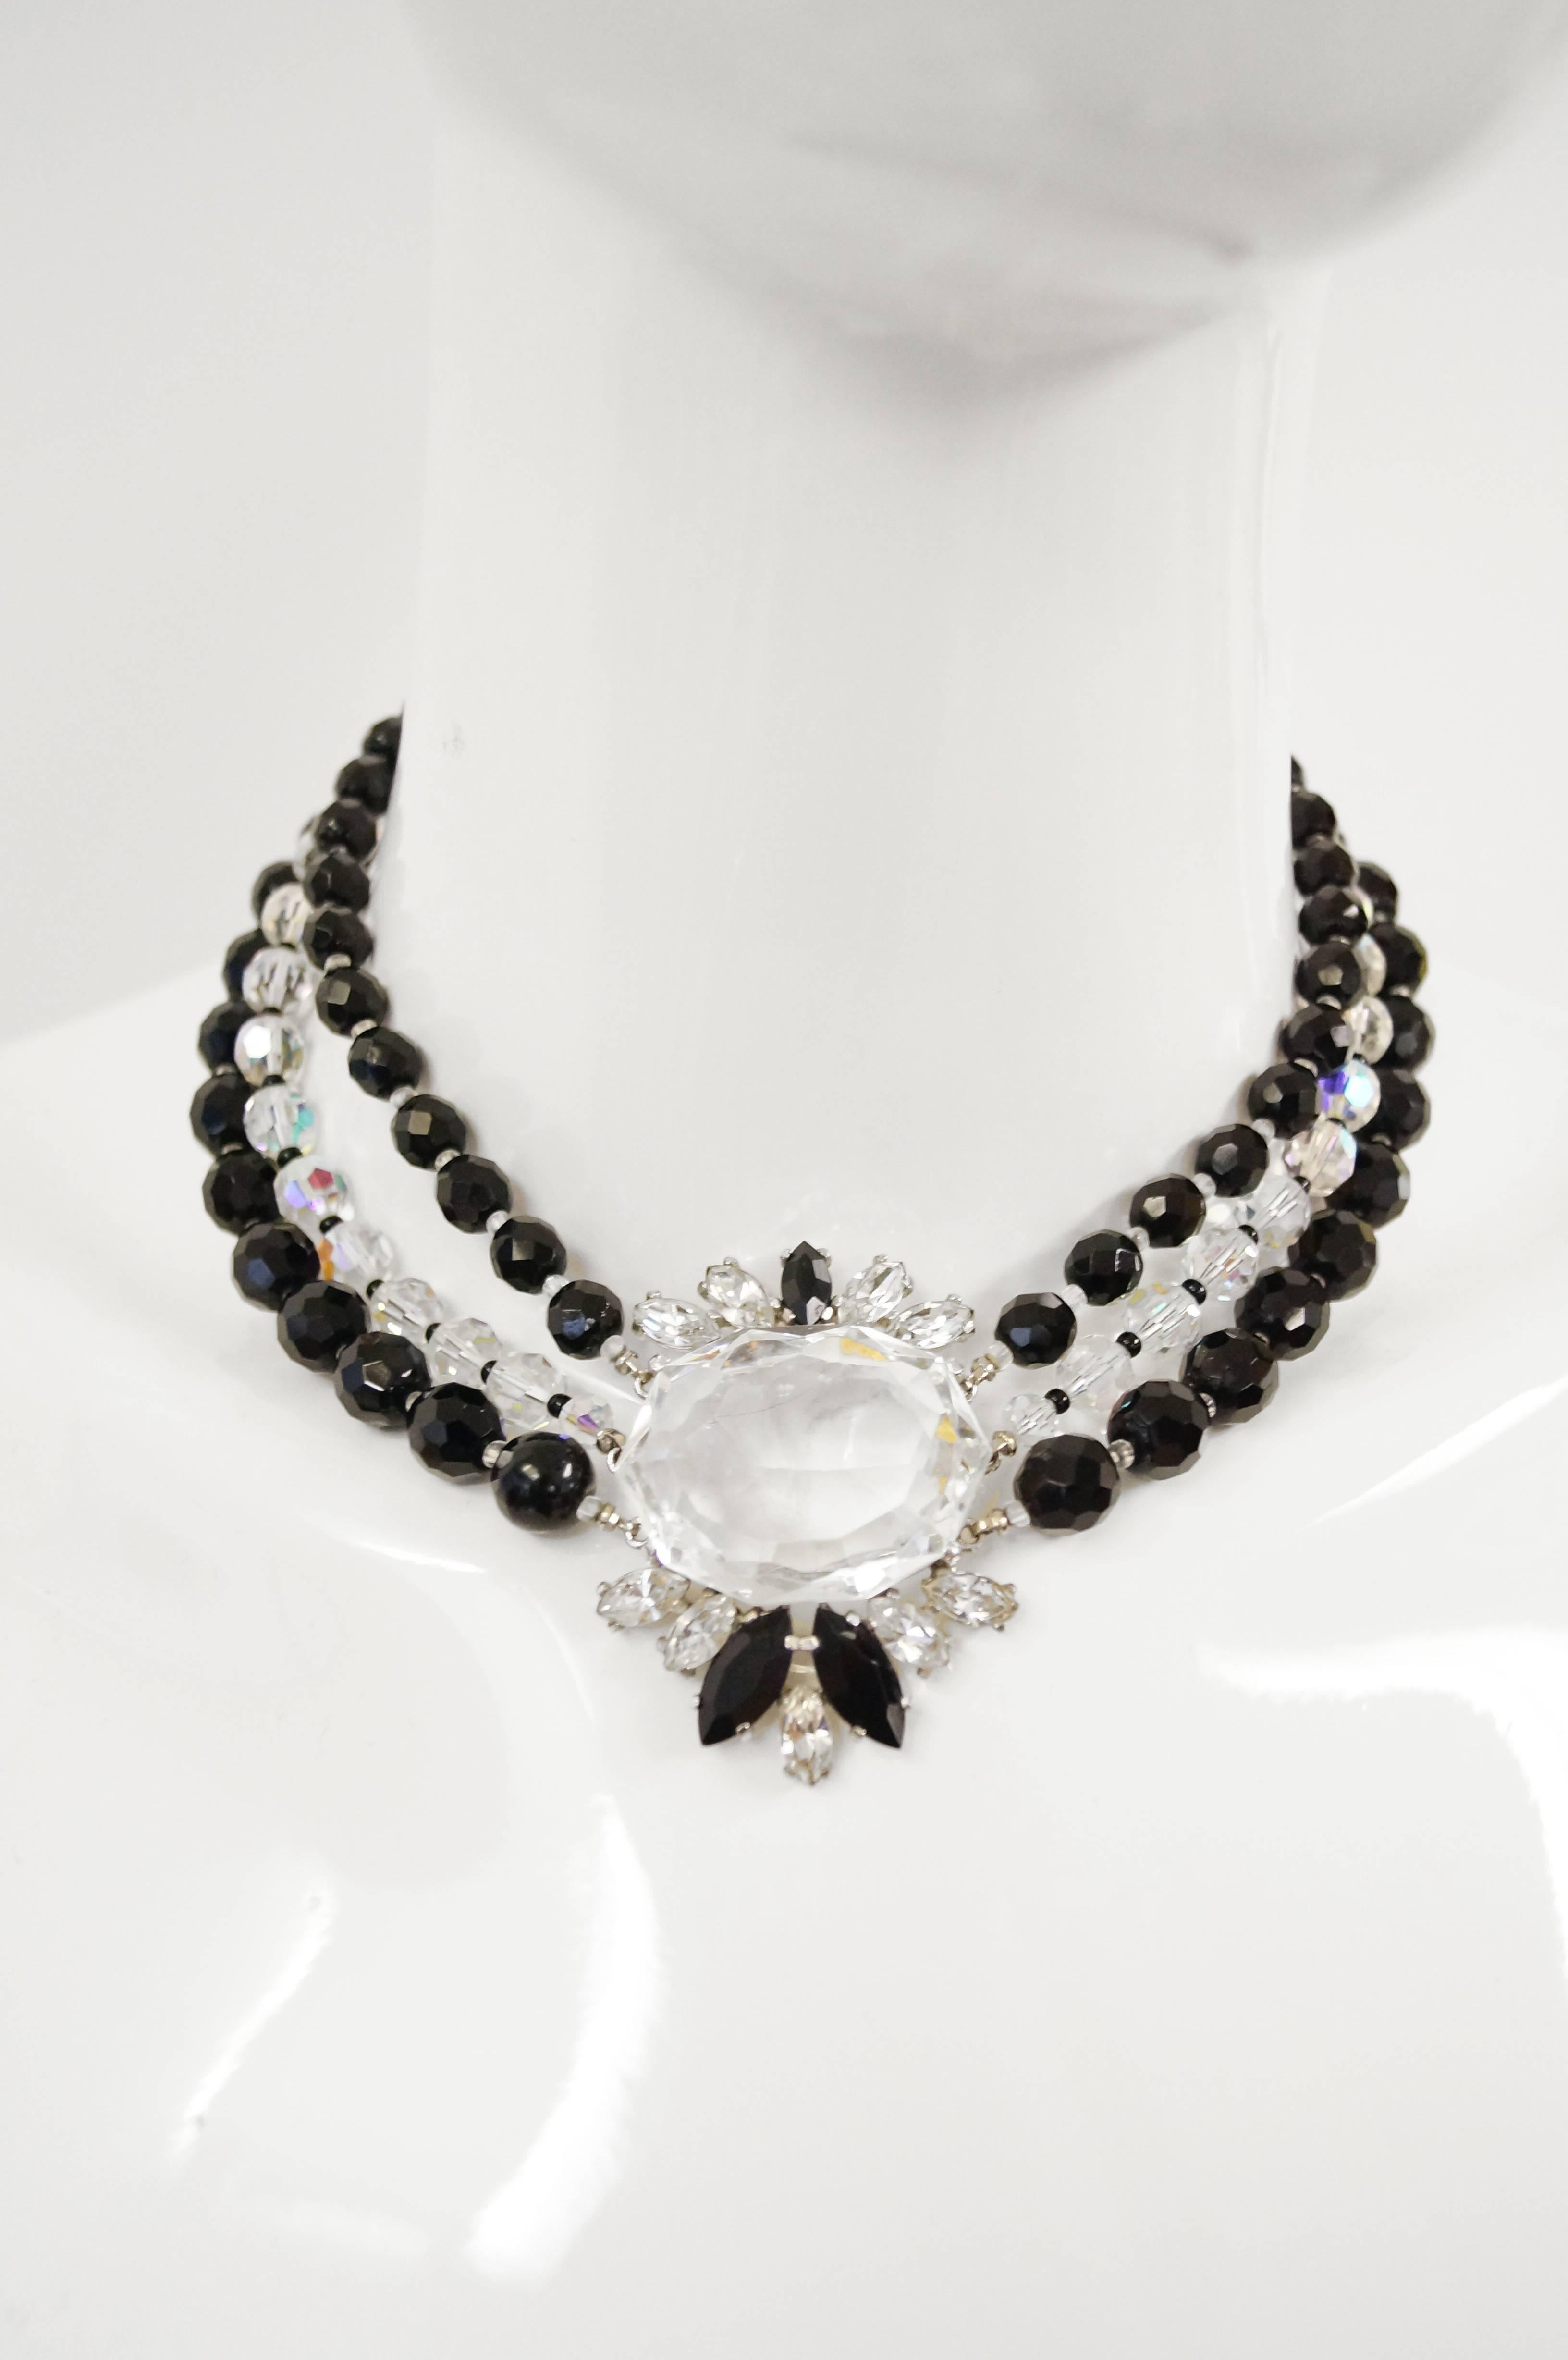 This black, iridescent, and clear rhinestone necklace by Elsa Schiaparelli is absolutely luminous! The focal point of the necklace is a large, clear, radiant, flat, multifaceted center stone surrounded by black and clear rhinestones. The center